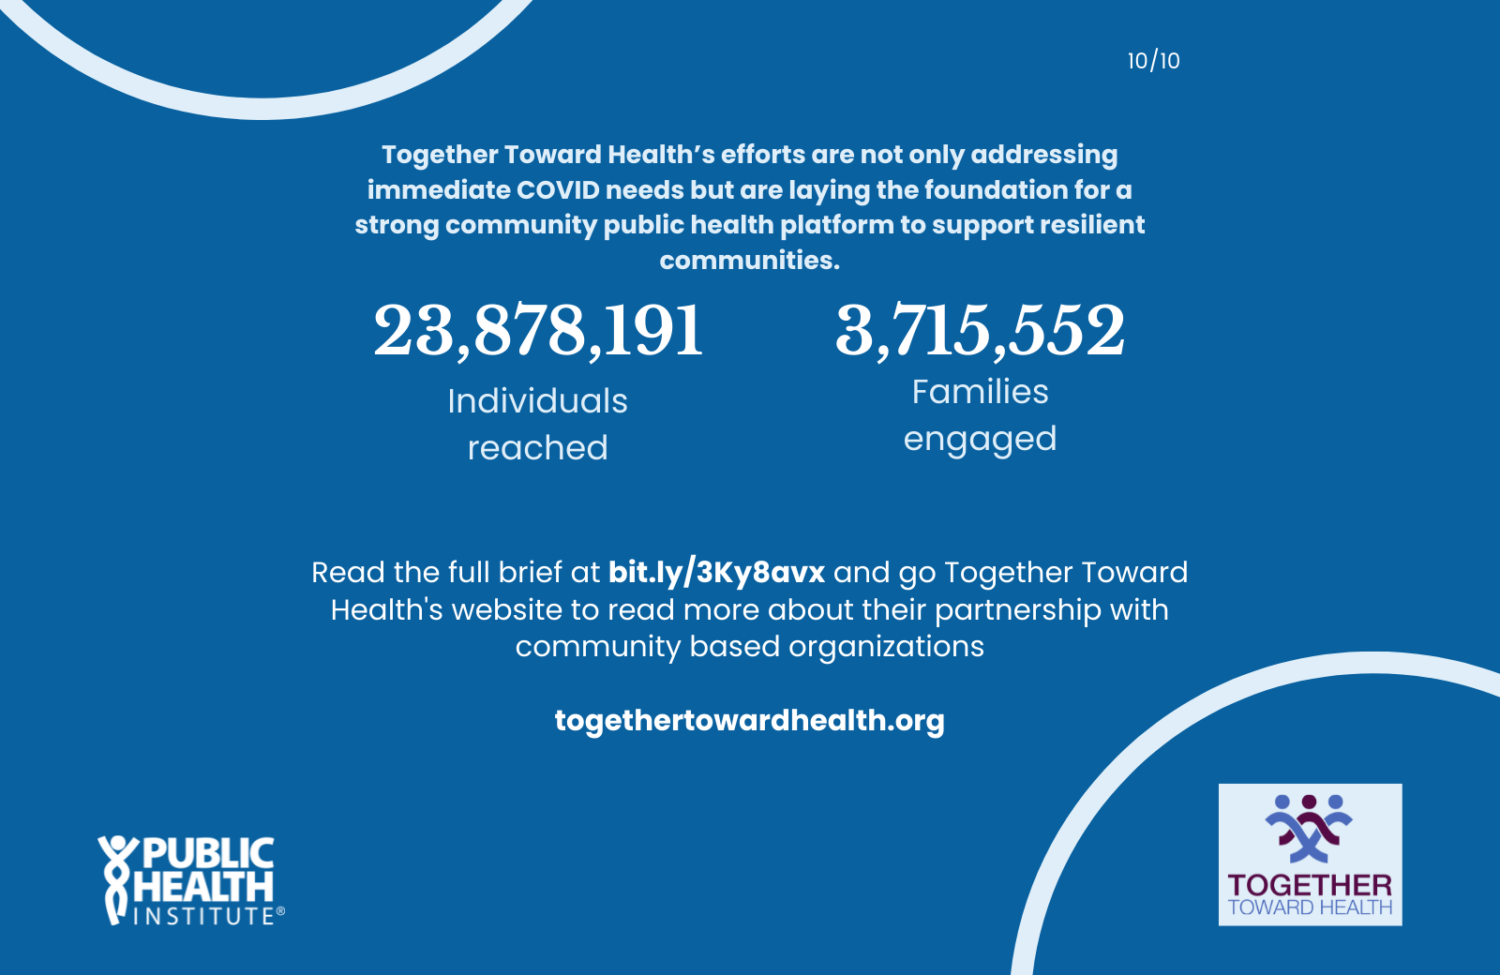 Together Toward Health’s efforts are not only addressing immediate COVID needs but are laying the foundation for a strong community public health platform to support resilient communities.